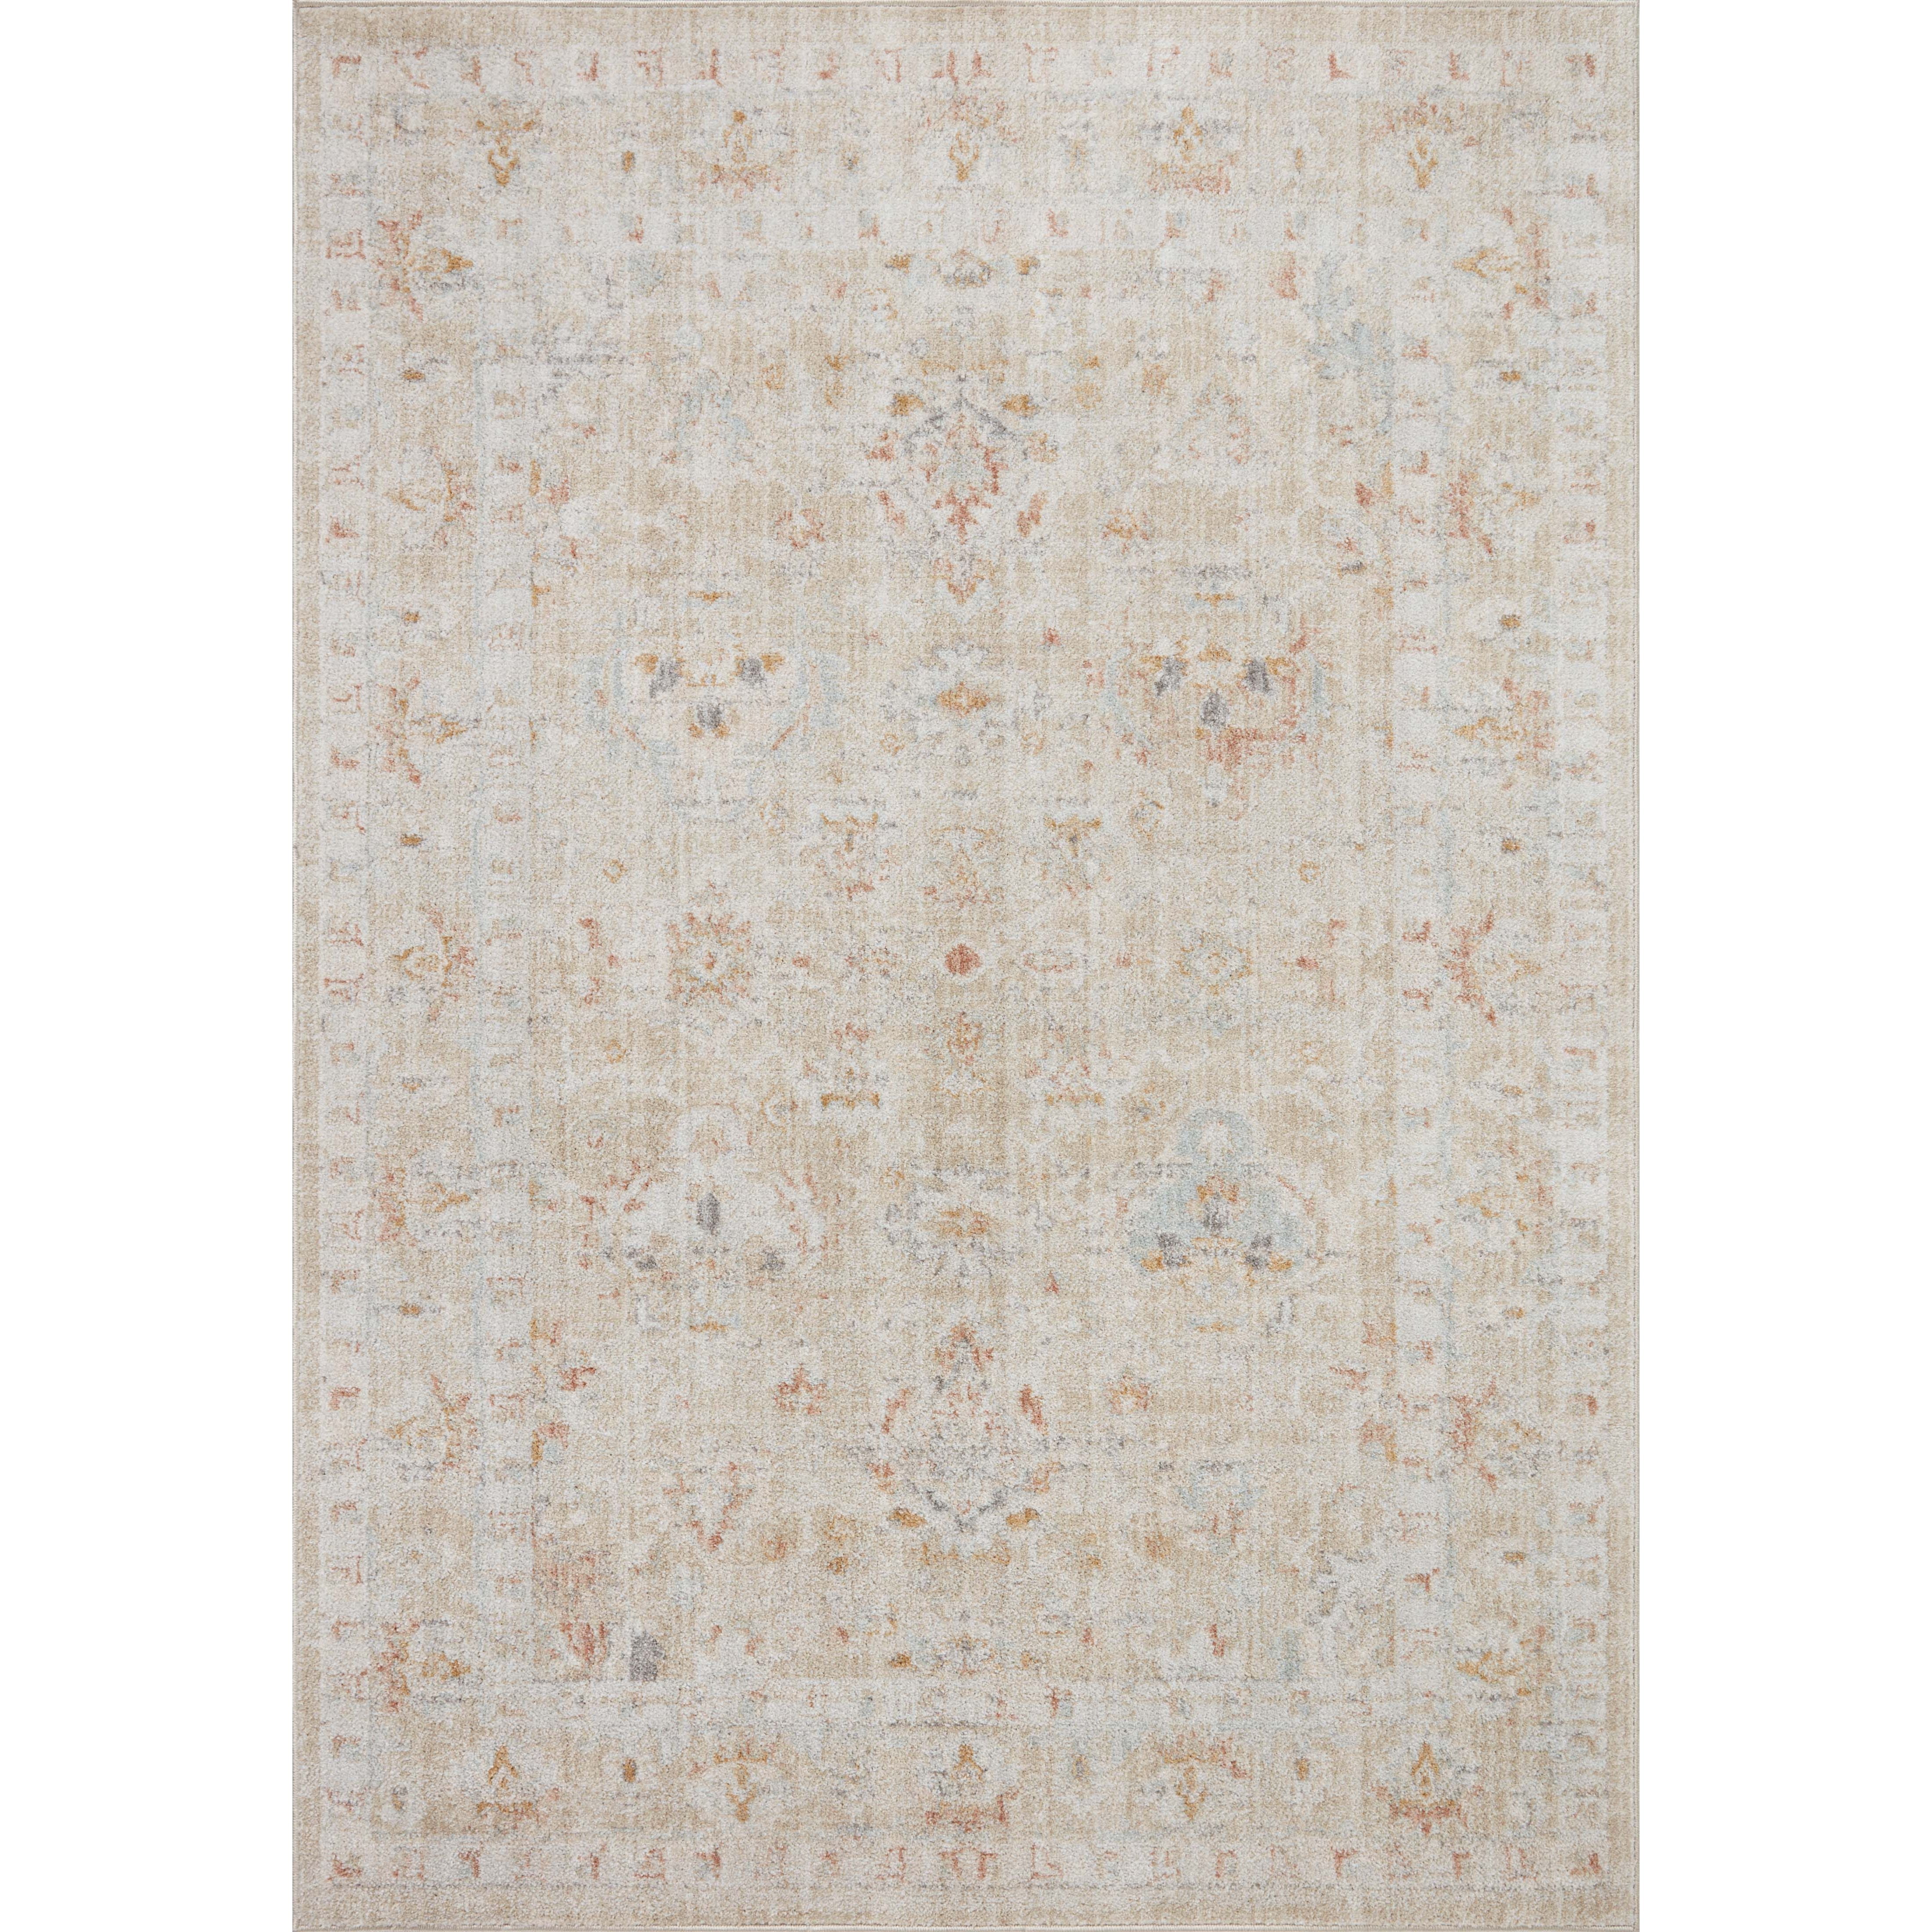 Inspired by antique Turkish Oushak carpets with large-scale motifs, the Monroe Sand / Sunrise Rug modernizes the traditional design in neutral palettes, many of which have black details that anchor the rug in the room. Monroe is power-loomed of 100% polypropylene for easy care and reliable durability. Amethyst Home provides interior design, new home construction design consulting, vintage area rugs, and lighting in the Monterey metro area.